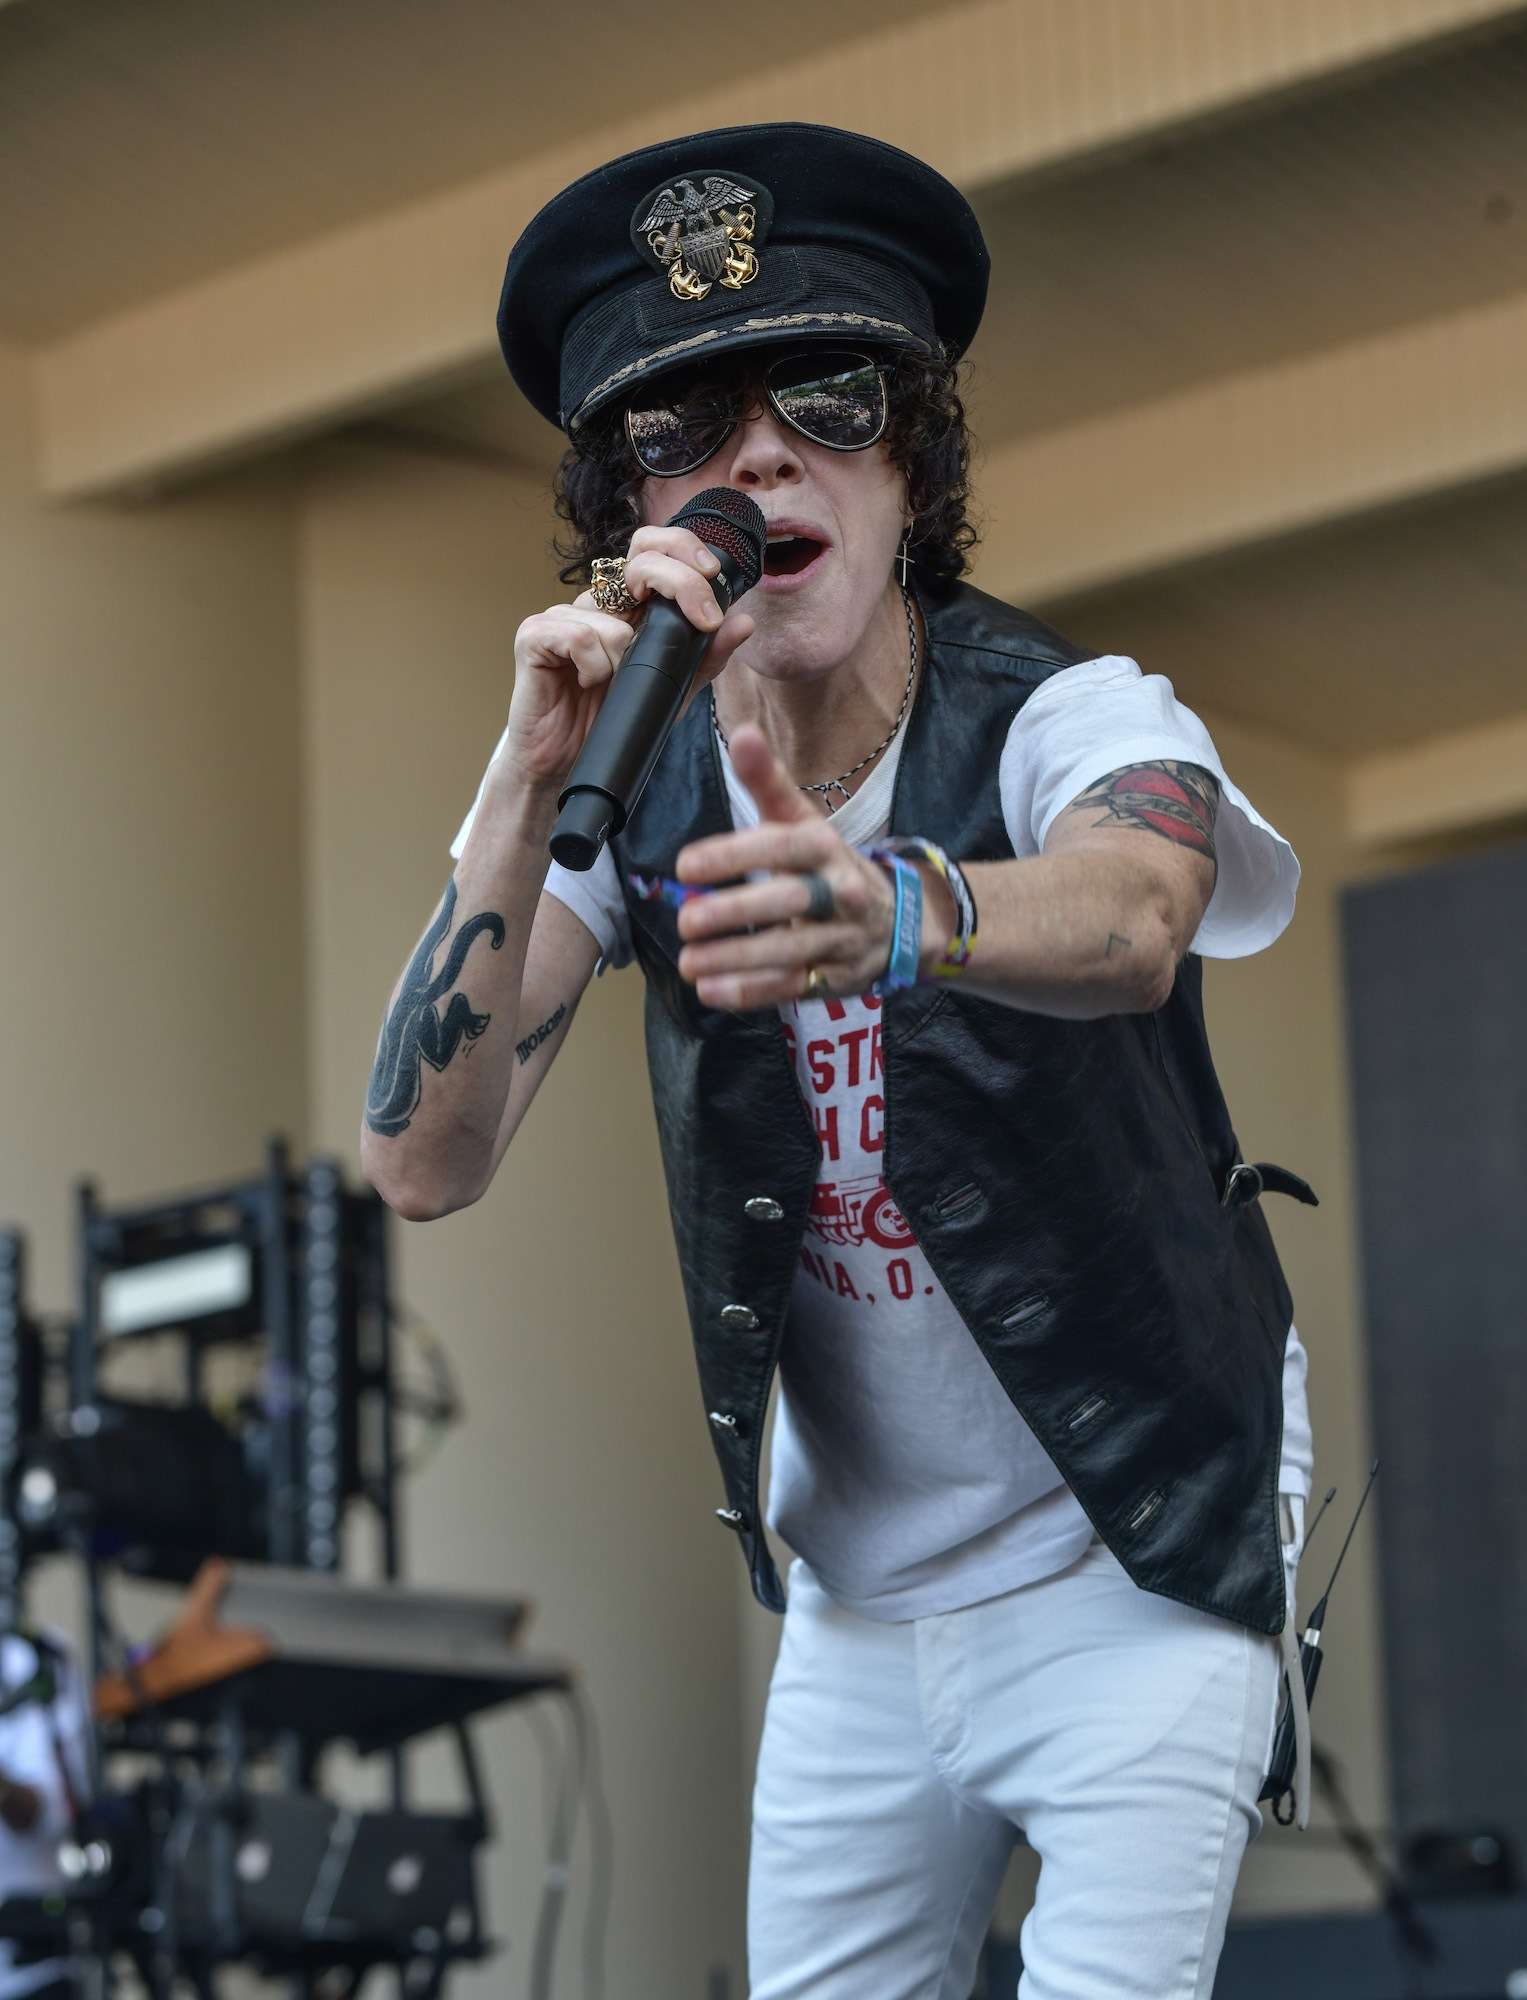 LP Live at Lollapalooza [GALLERY] 11